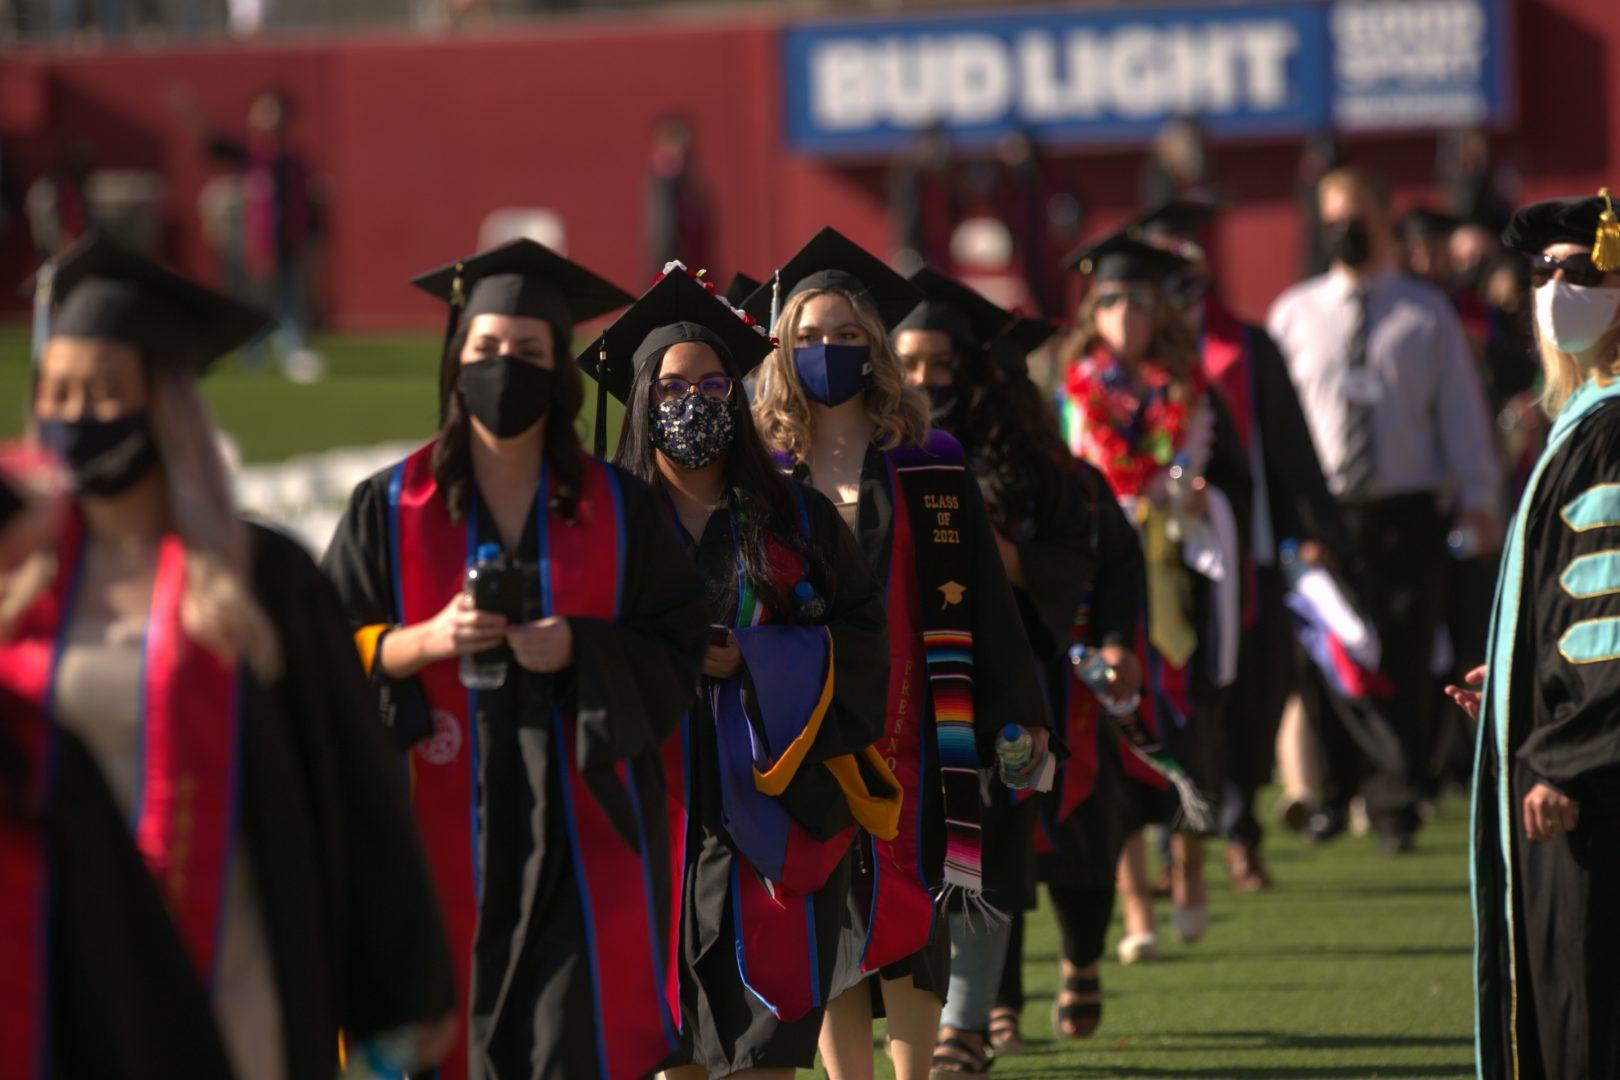 Graduates+of+the+Kremen+School+of+Education+and+Human+Development+walk+into+Bulldog+Stadium+for+their+commencement+ceremony+on+Friday%2C+May+14%2C+2021.+